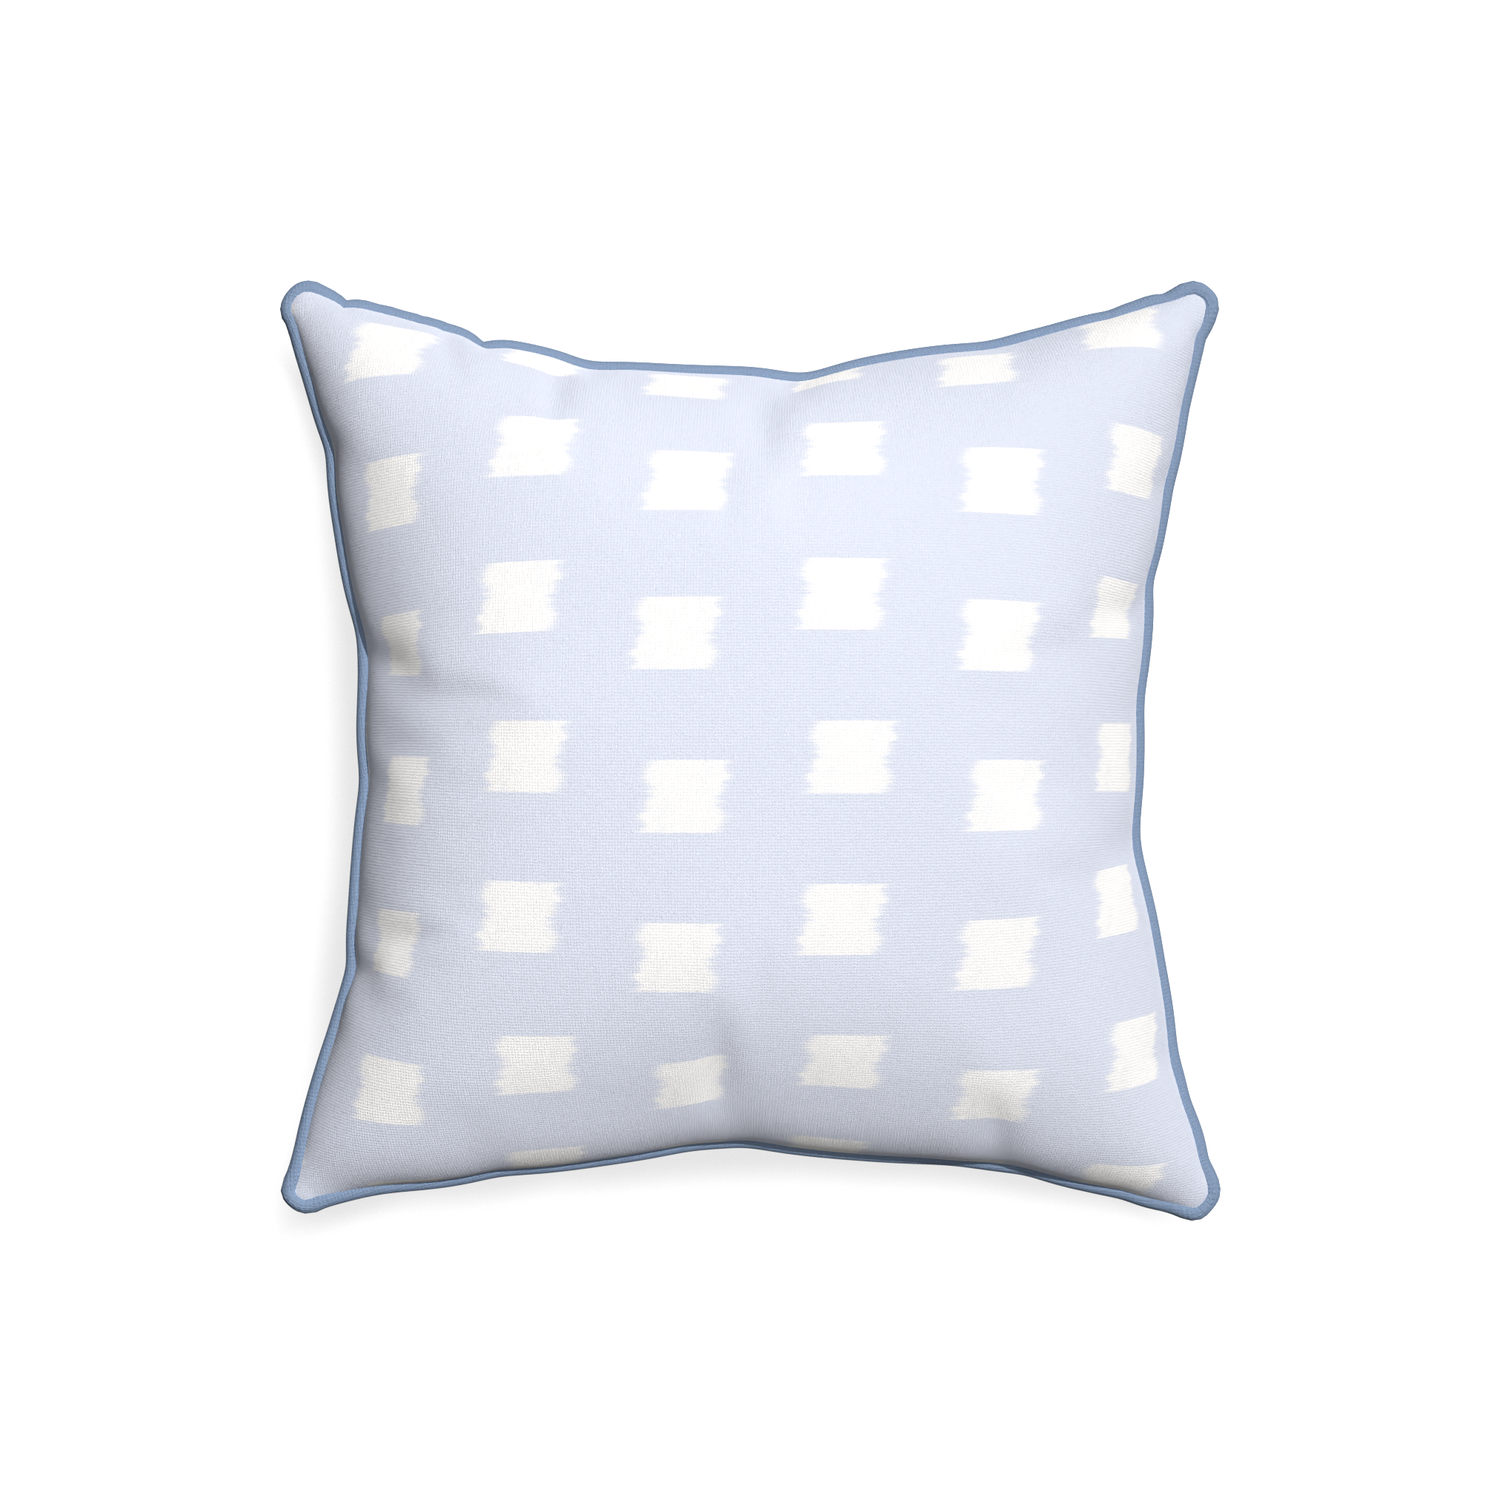 20-square denton custom sky blue patternpillow with sky piping on white background